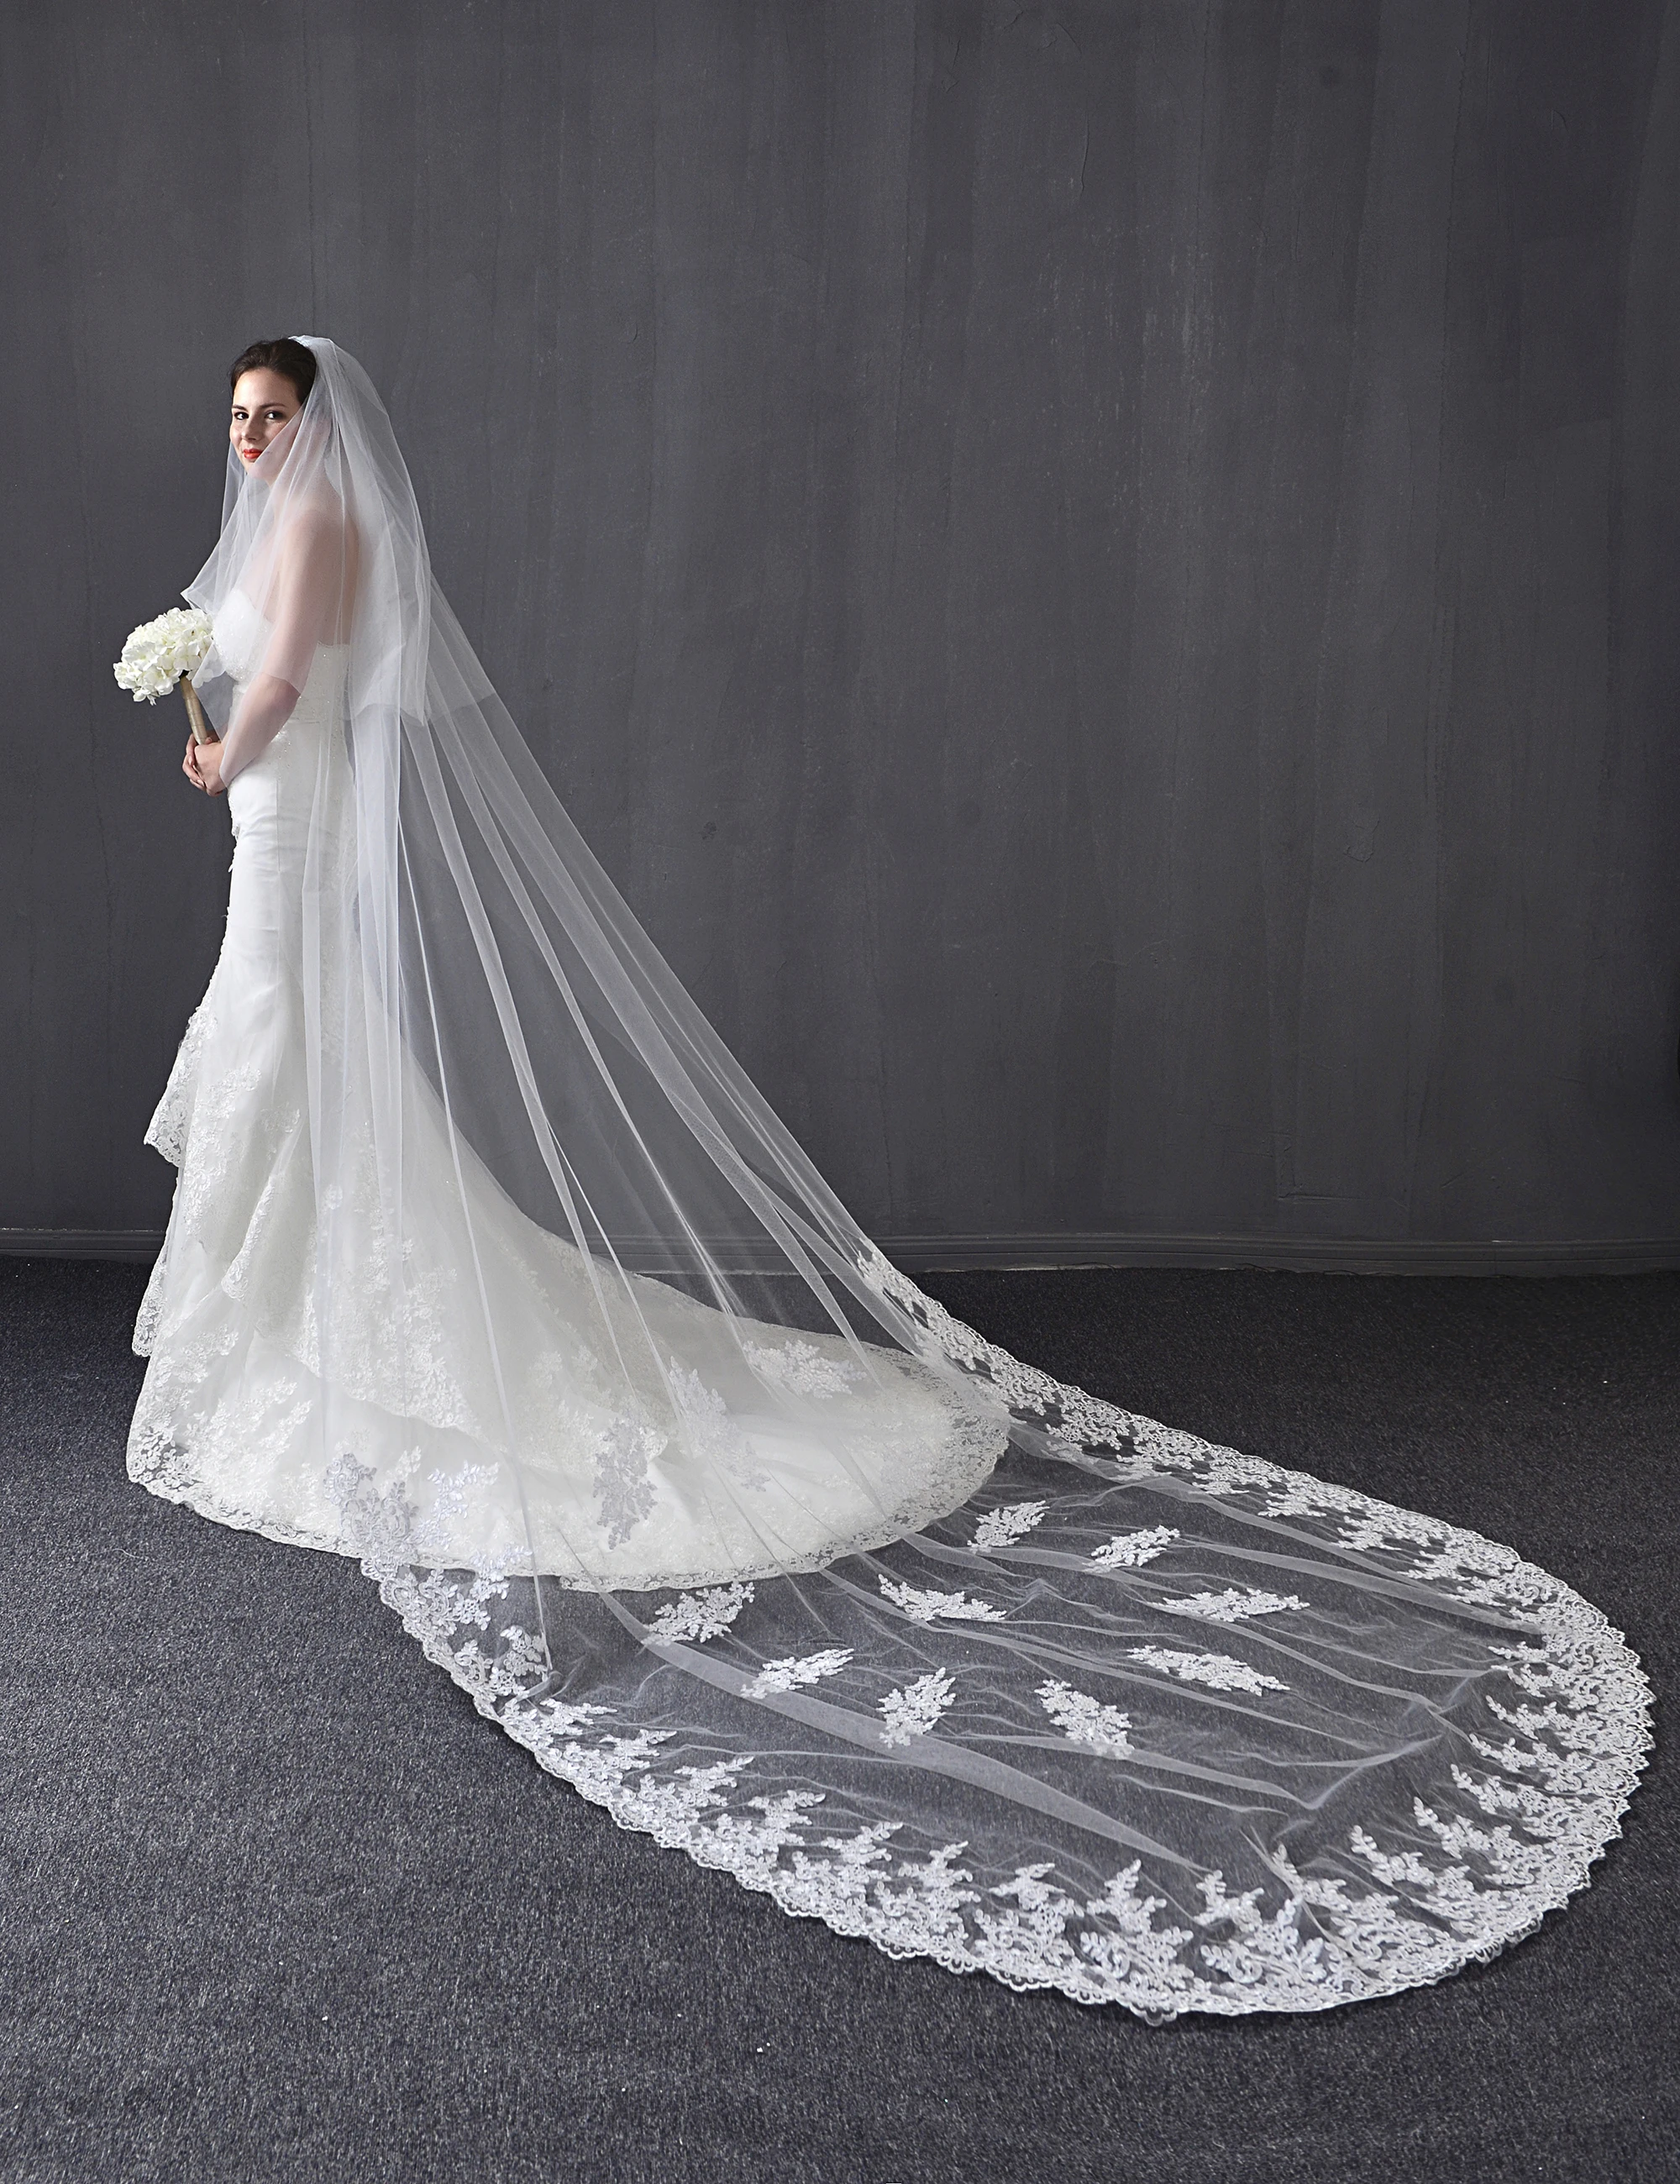 Bridal Luxury Crystal Wedding Veils Cathedral Lace Applique Comb 3M White Ivory